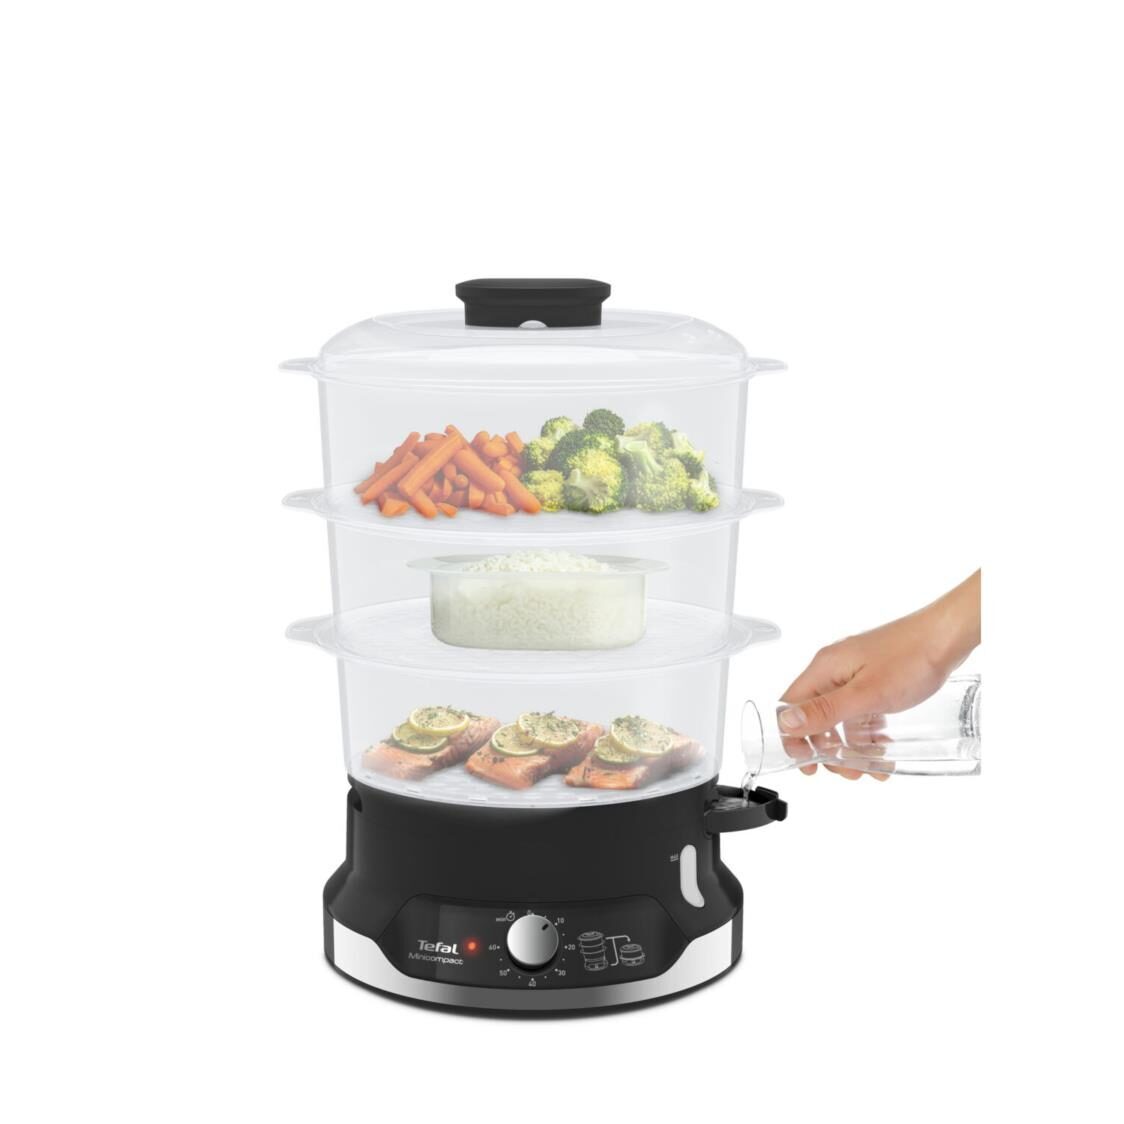 Tefal New Ultracompact 3 Tier 9L VC2048